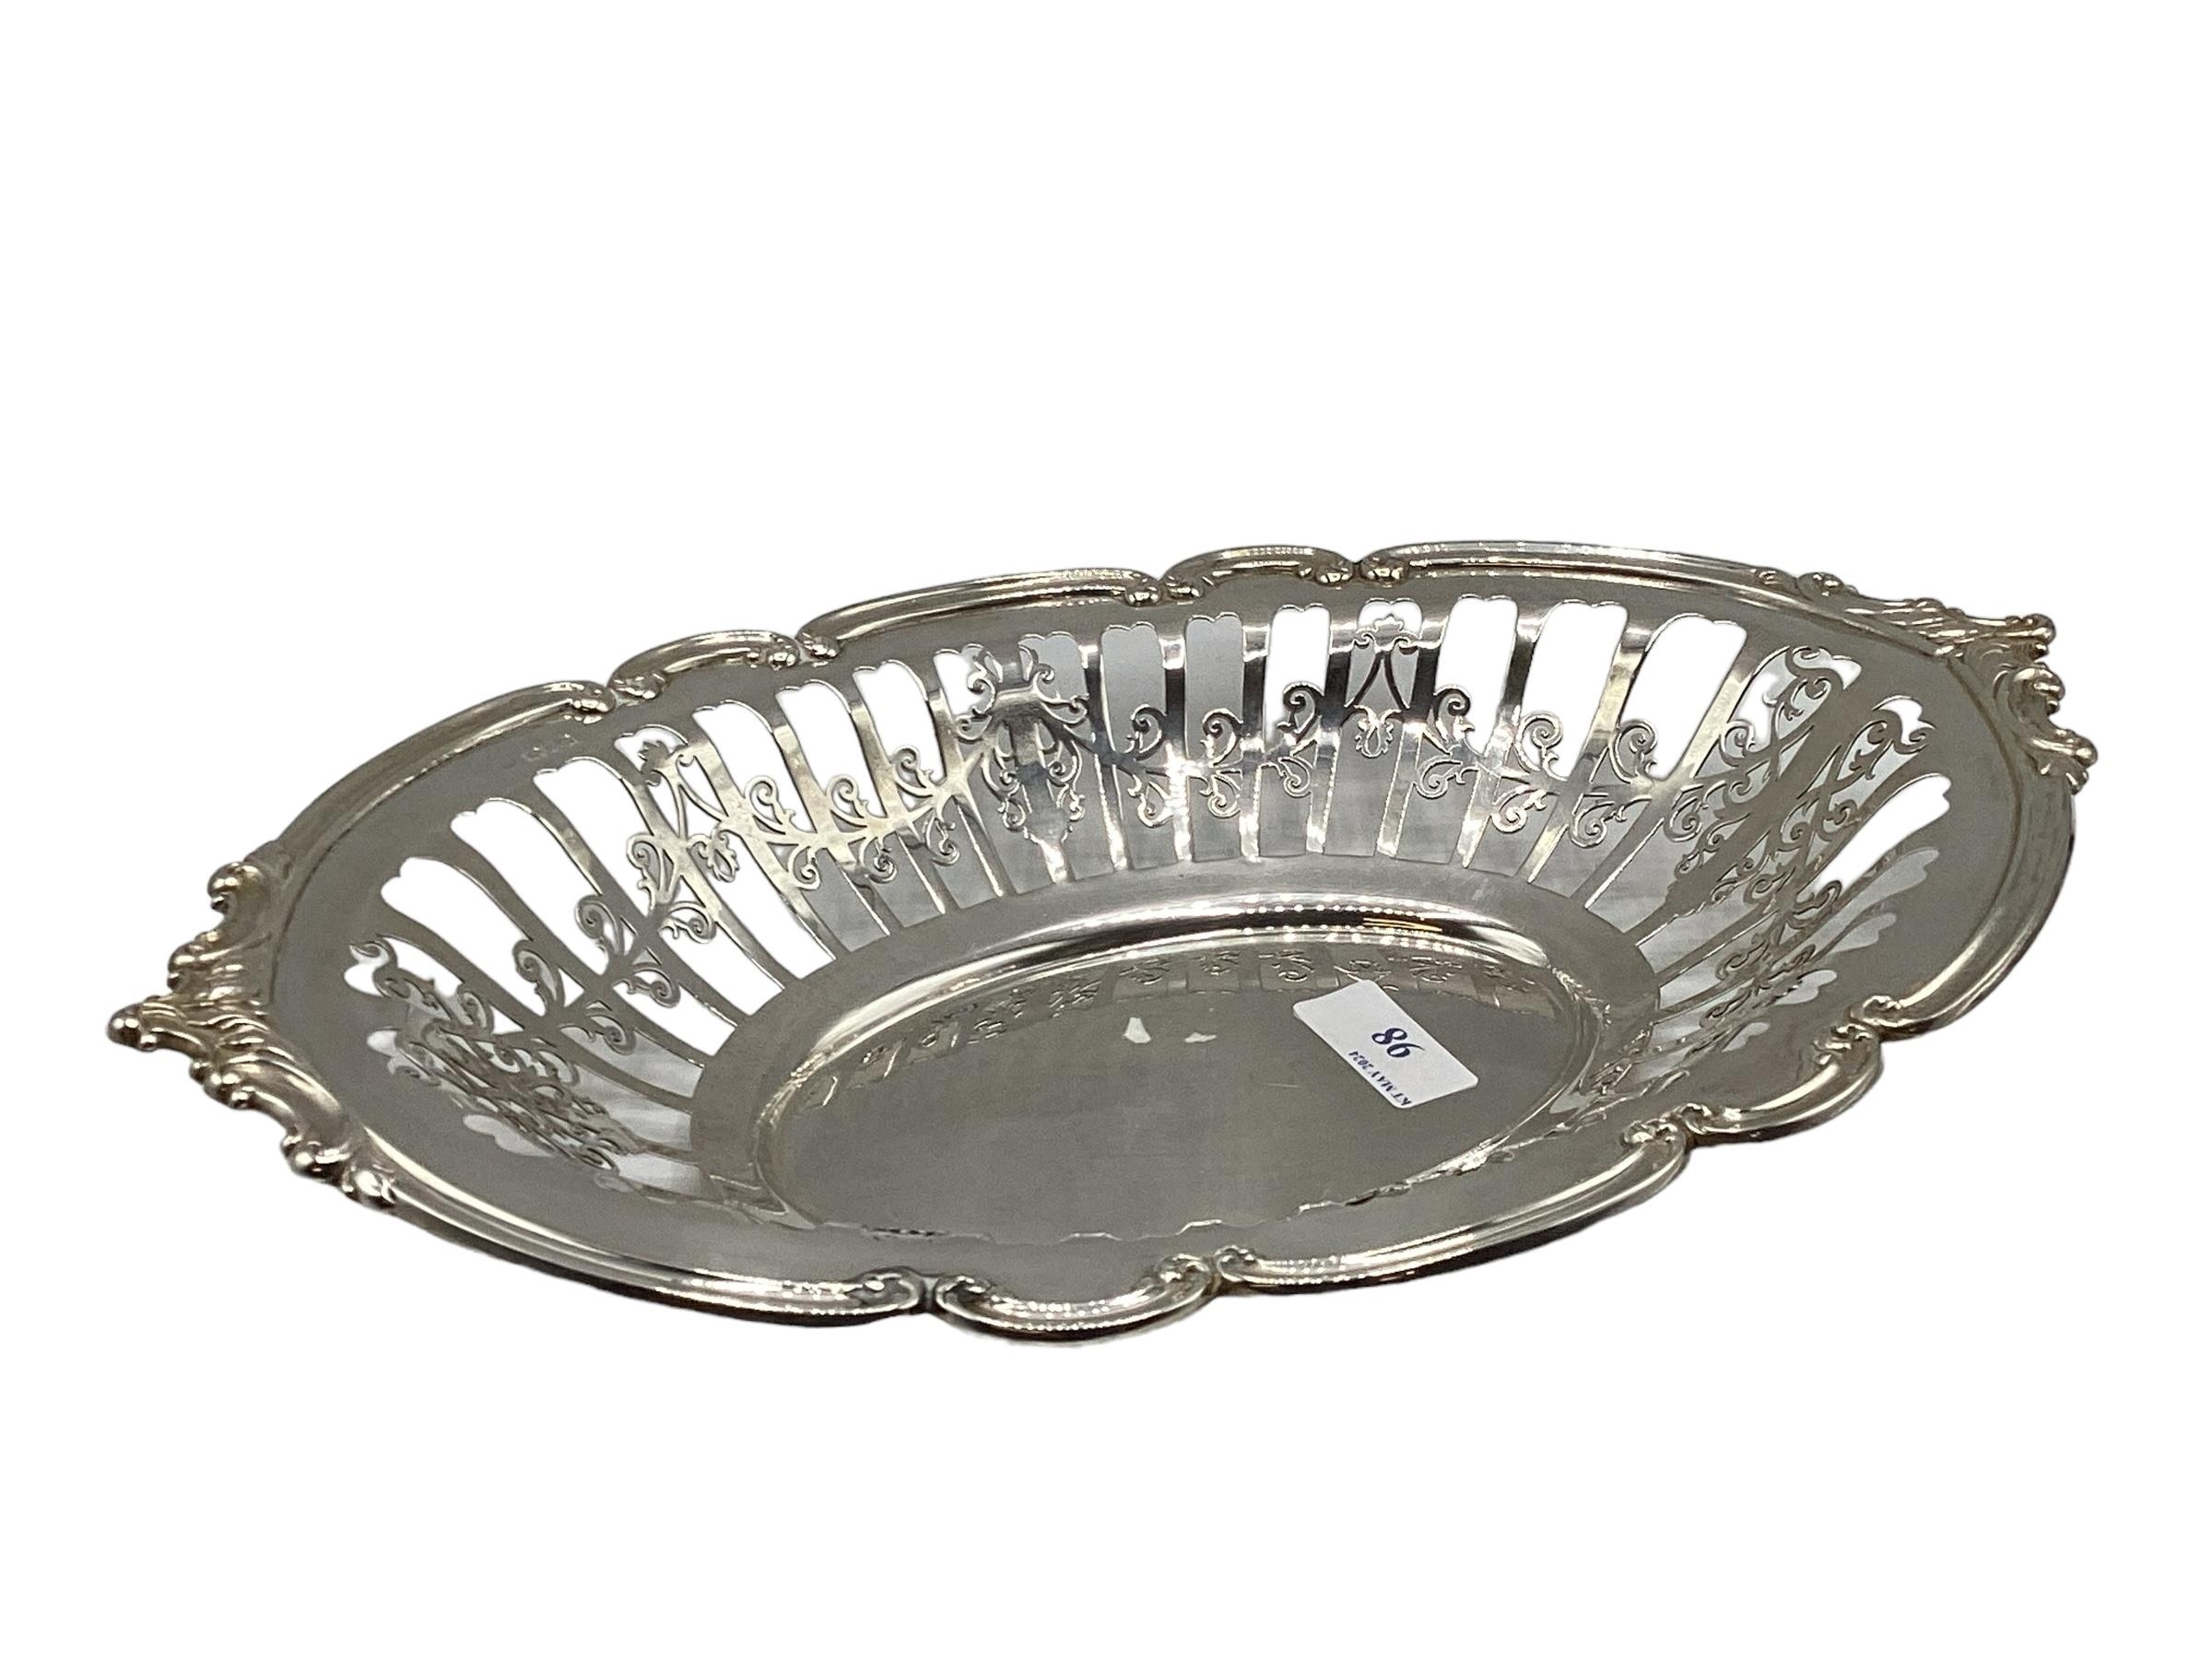 A sterling silver pierced bread basket. James Deakin and Son Chester 1911, 433 G